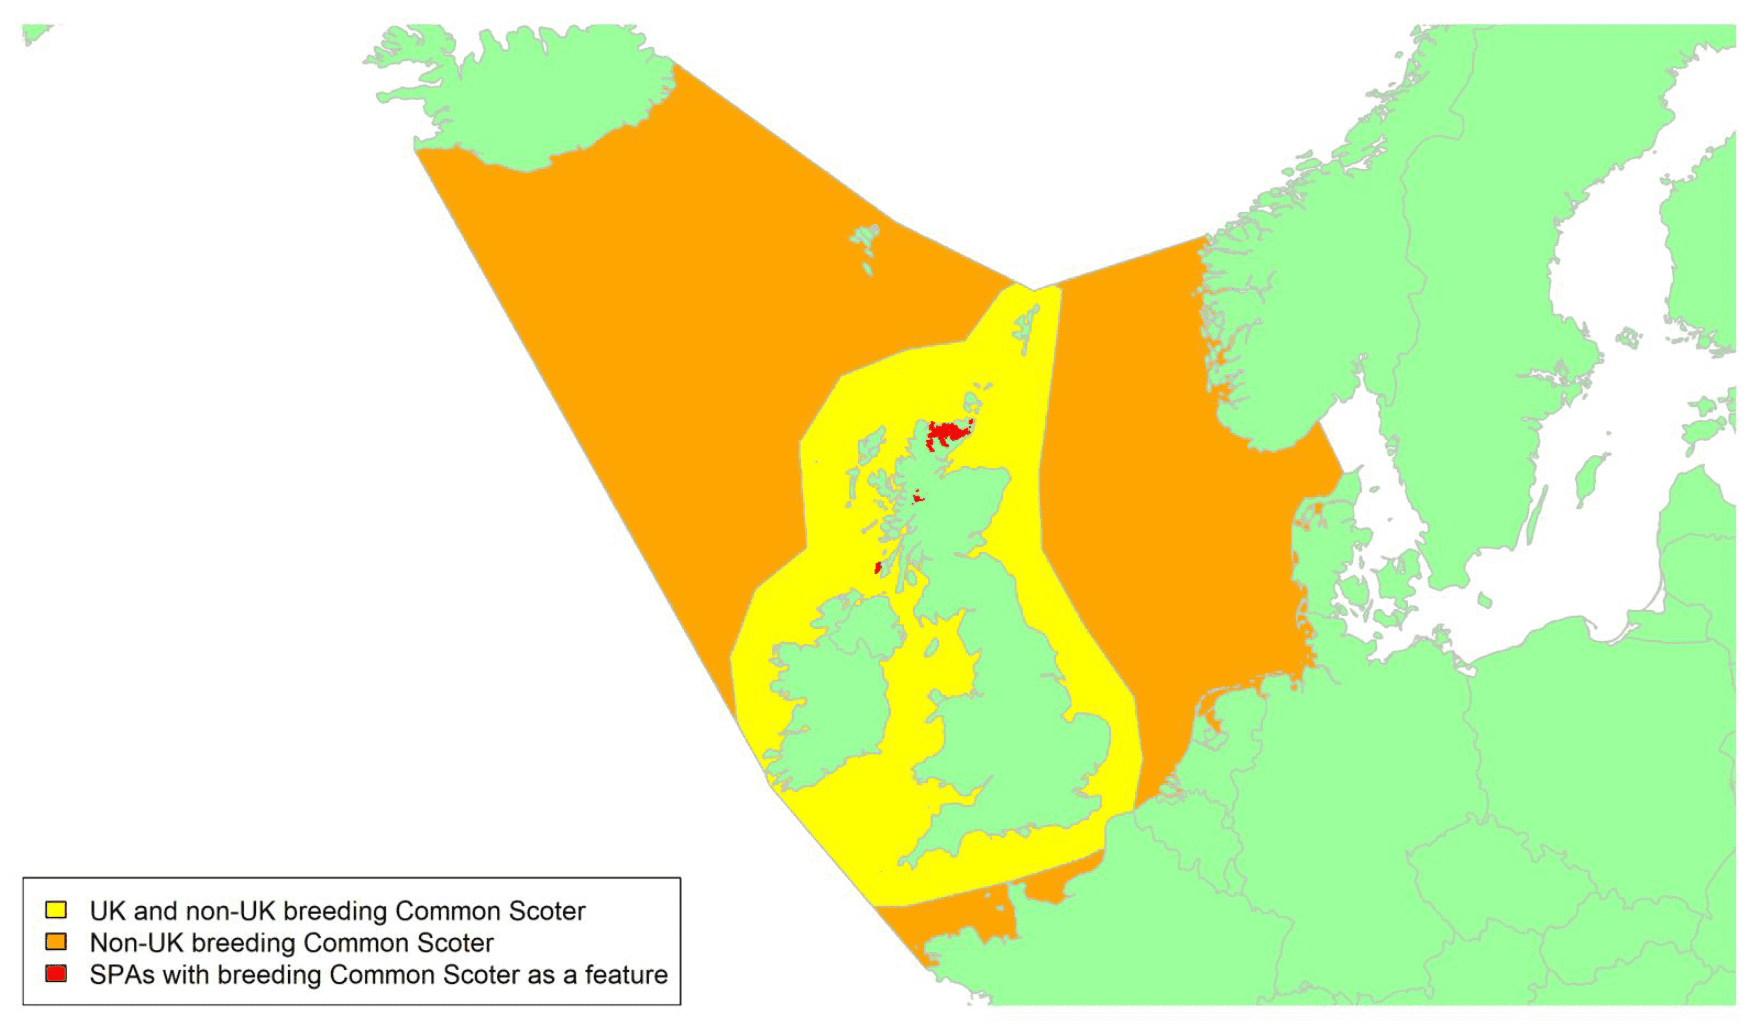 Map of North West Europe showing migratory routes and SPAs within the UK for breeding Common Scoter as described in the text below.